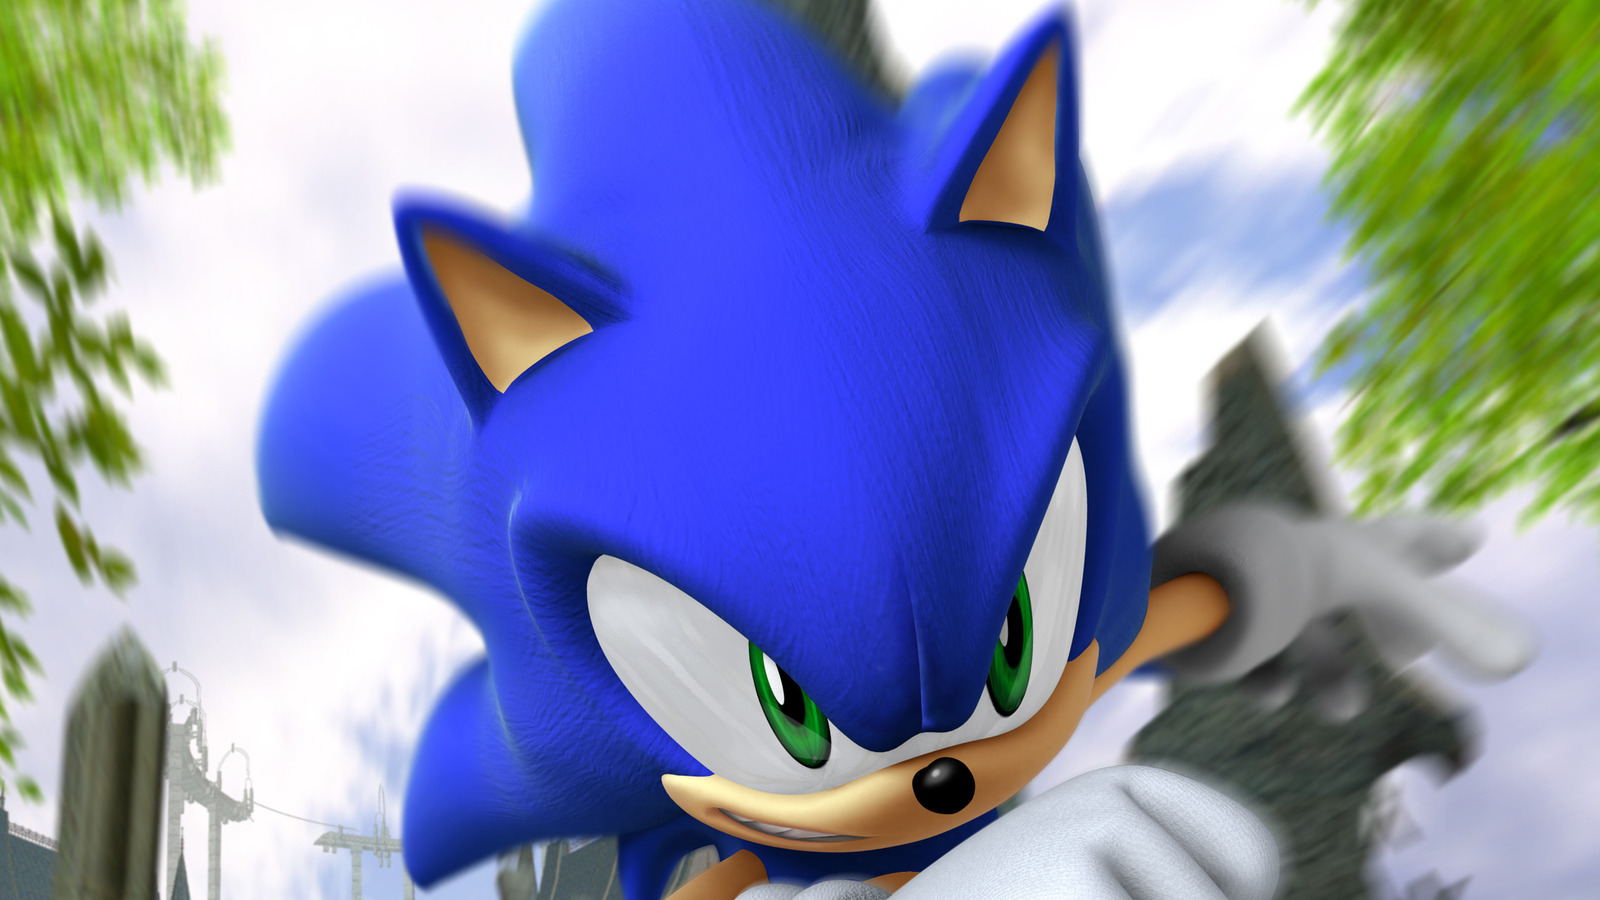 Character Chronicle: Metal Sonic – Source Gaming